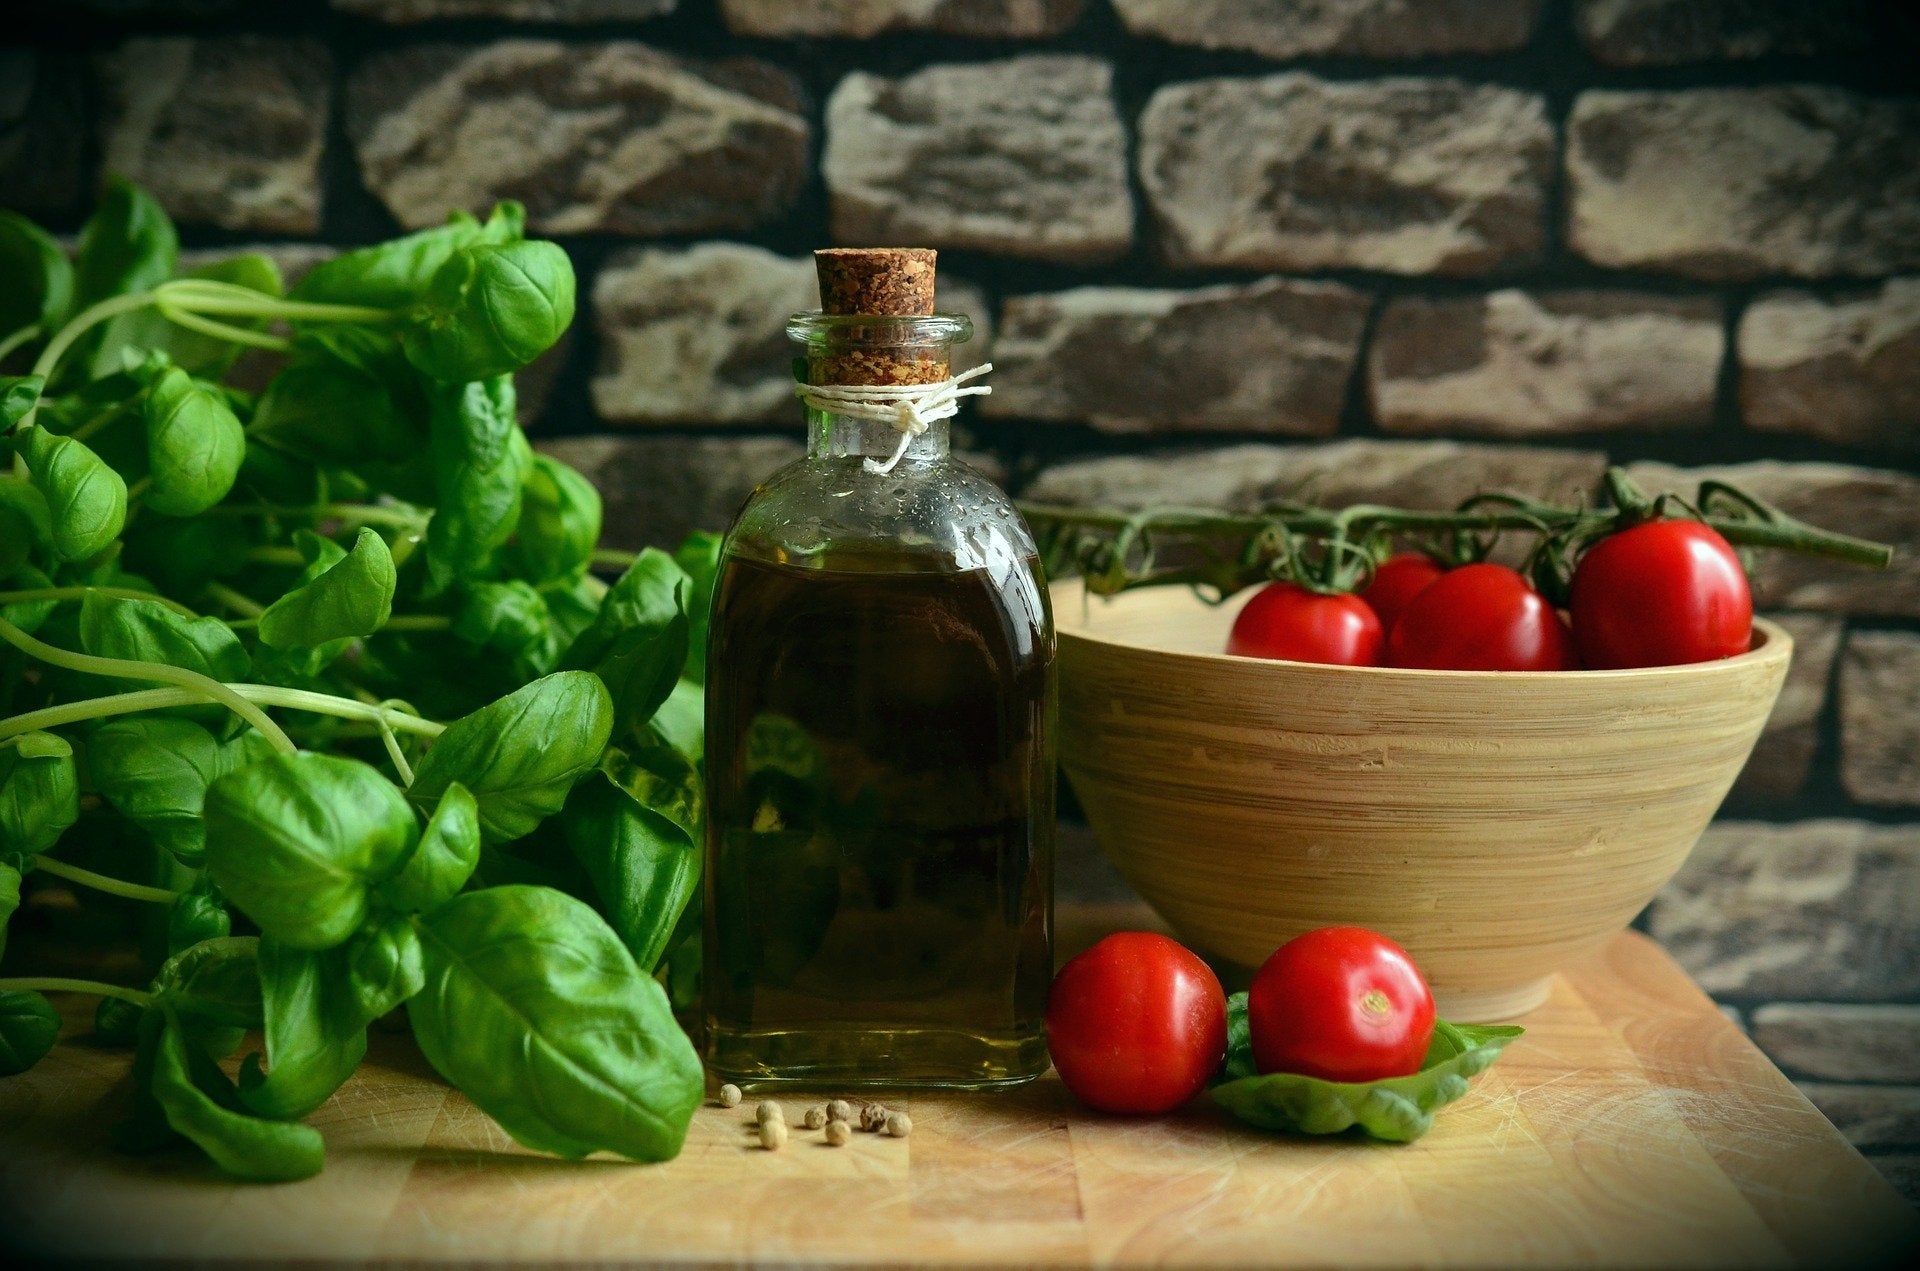 Don't compromise on flavor or health – 5 tips to select a high quality olive oil